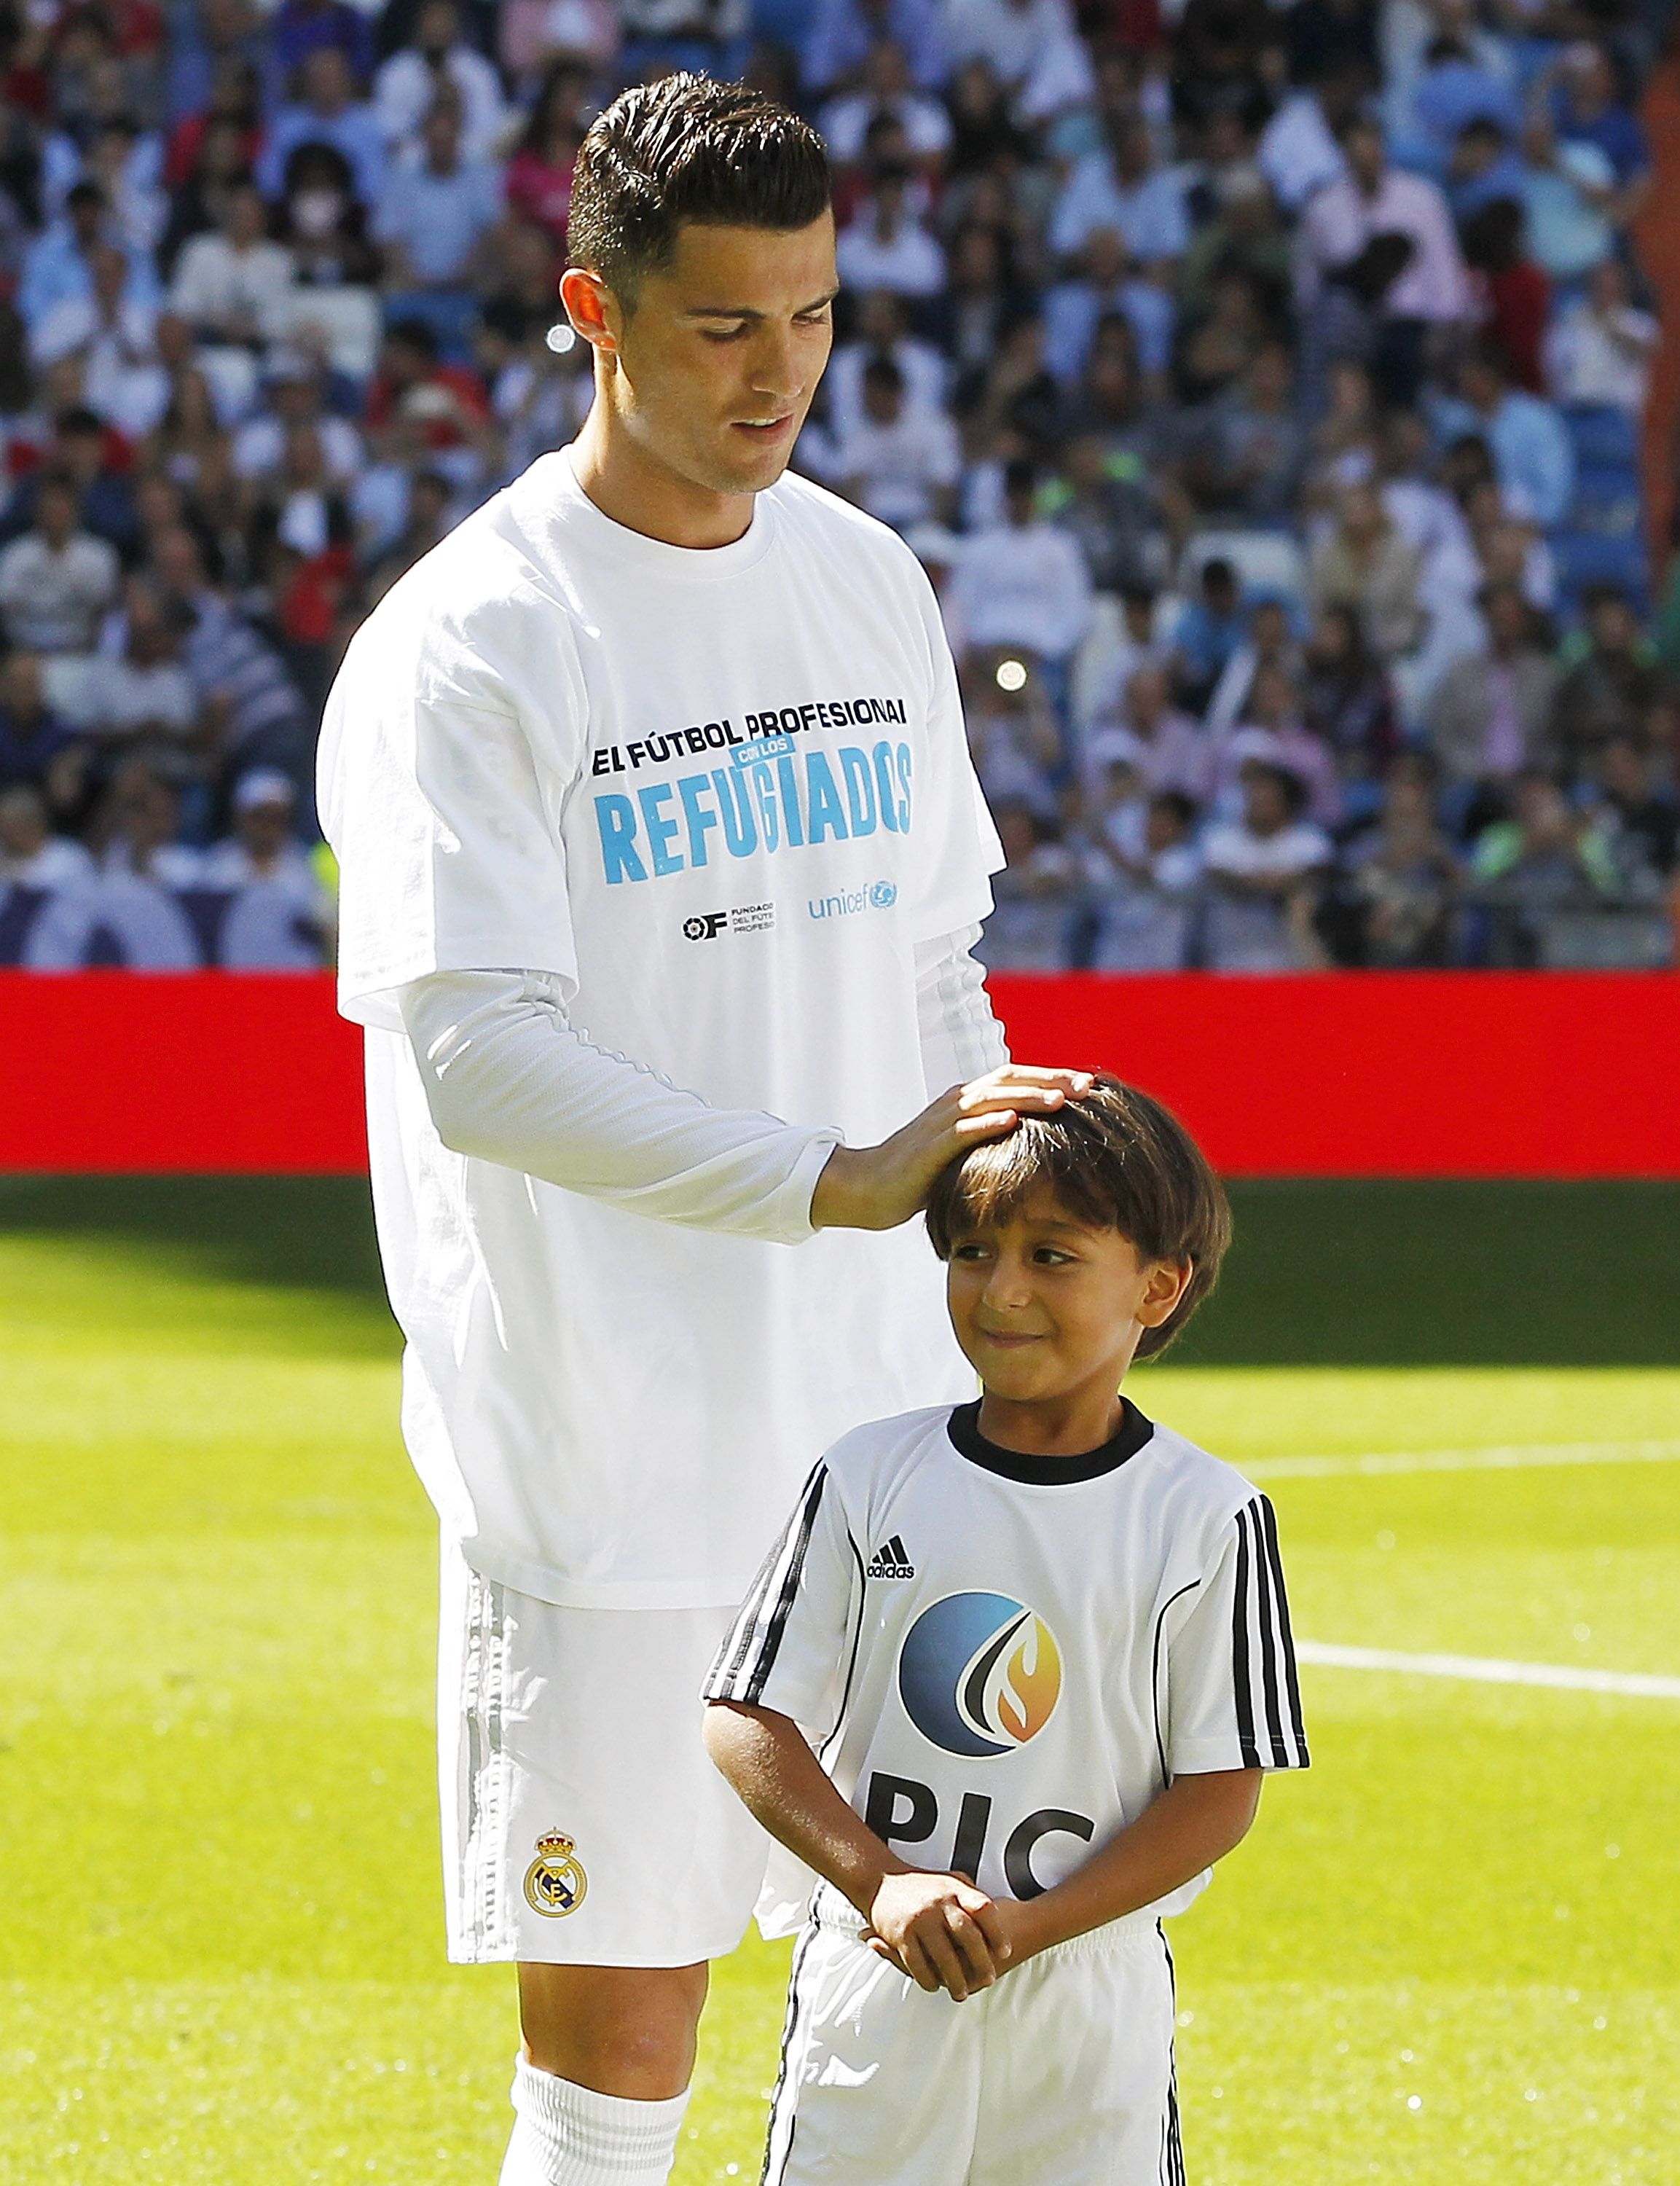 Zaid, son of Osama Abdul Mohsen, the Syrian refugee who was tripped over by a Hungarian journalist, pose with Cristiano Ronaldo of Real Madrid before the La Liga match between Real Madrid CF and Granada CF at Estadio Santiago Bernabeu on Sept. 19, 2015 in Madrid, Spain. (Angel Martinez—Real Madrid/Getty Images)